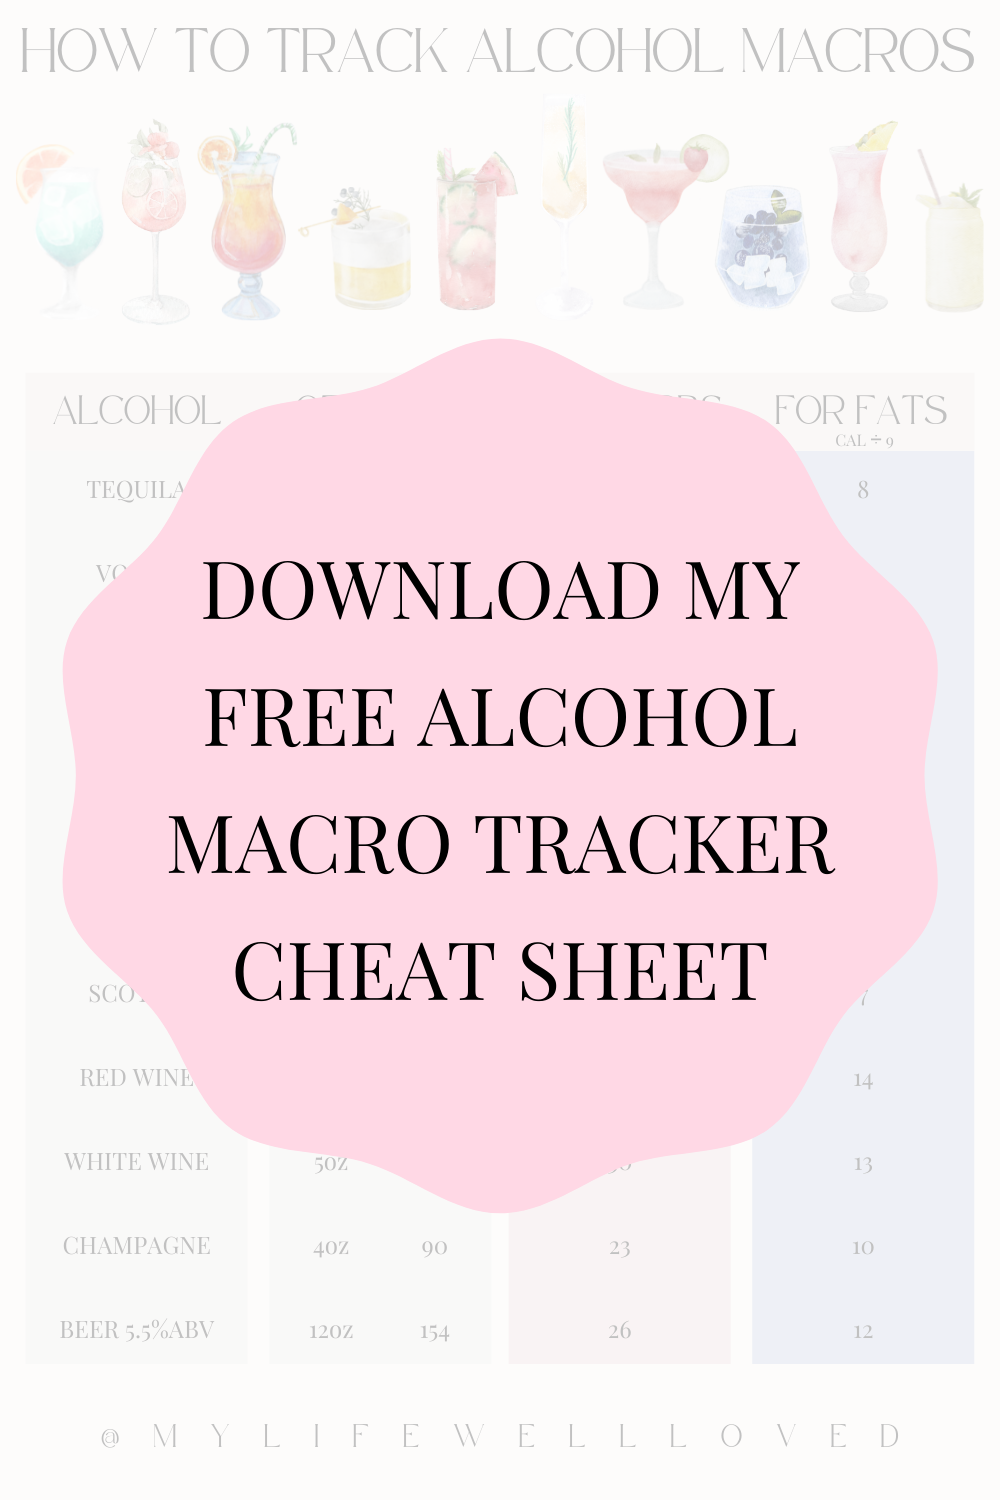 Lifestyle + health blogger, My Life Well Loved, shares how to track macros with alcohol! Click NOW to learn more!